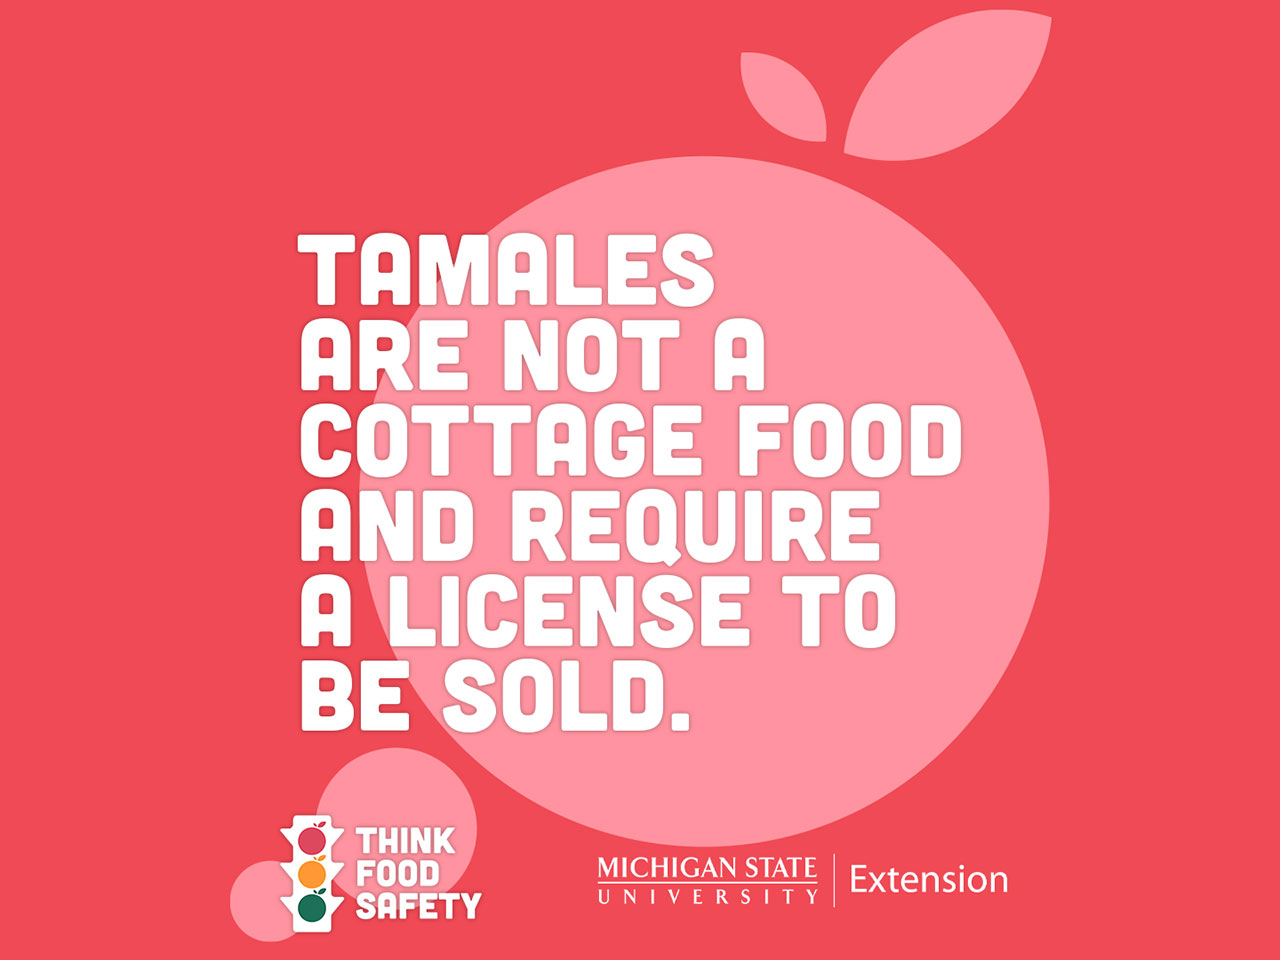 Tamales are not cottage food and require a license to be sold